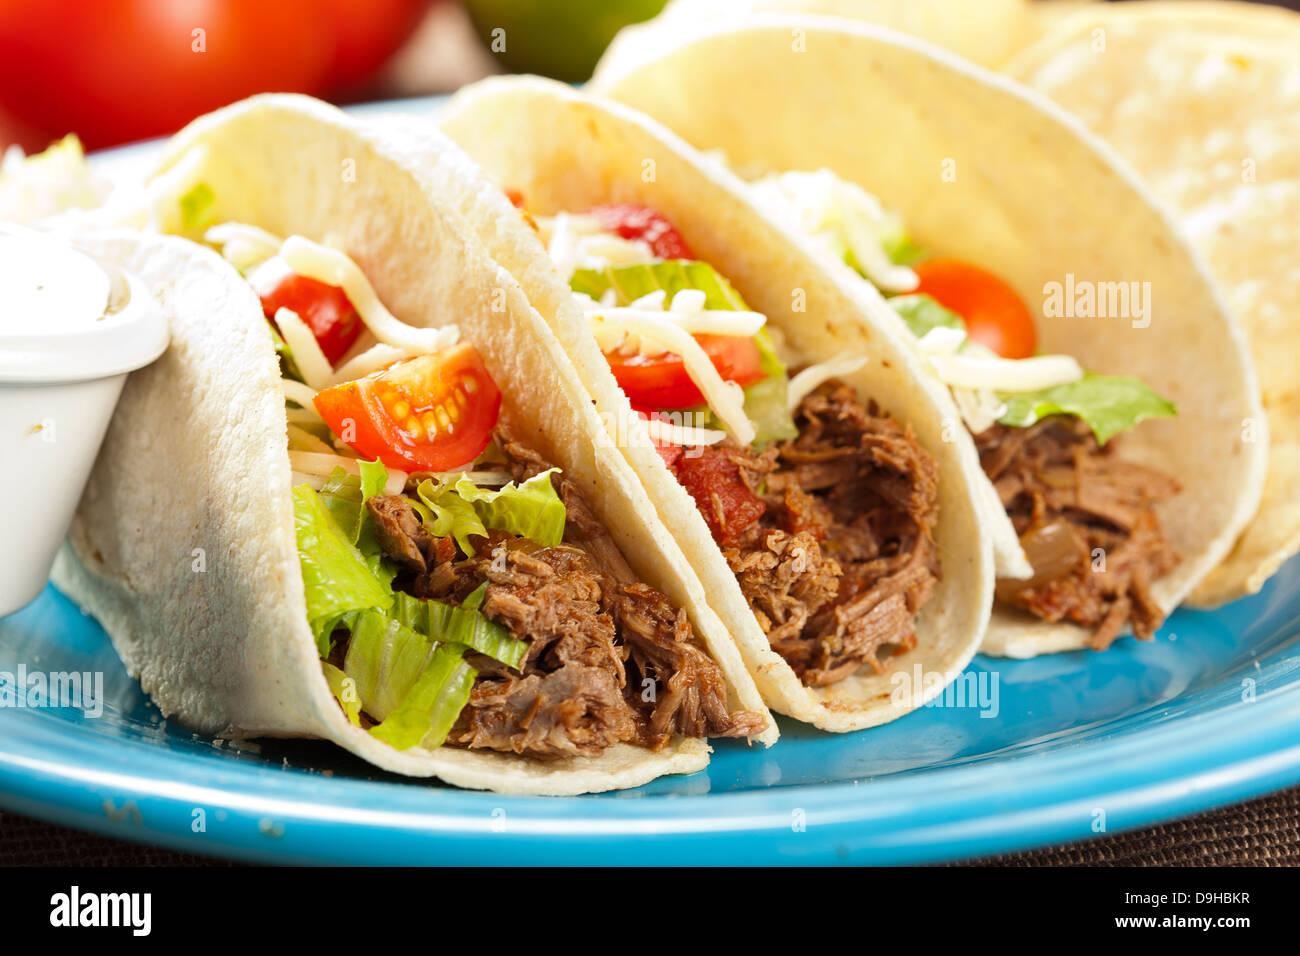 Fresh Homemade Shredded Beef Tacos with organic ingredients Stock Photo